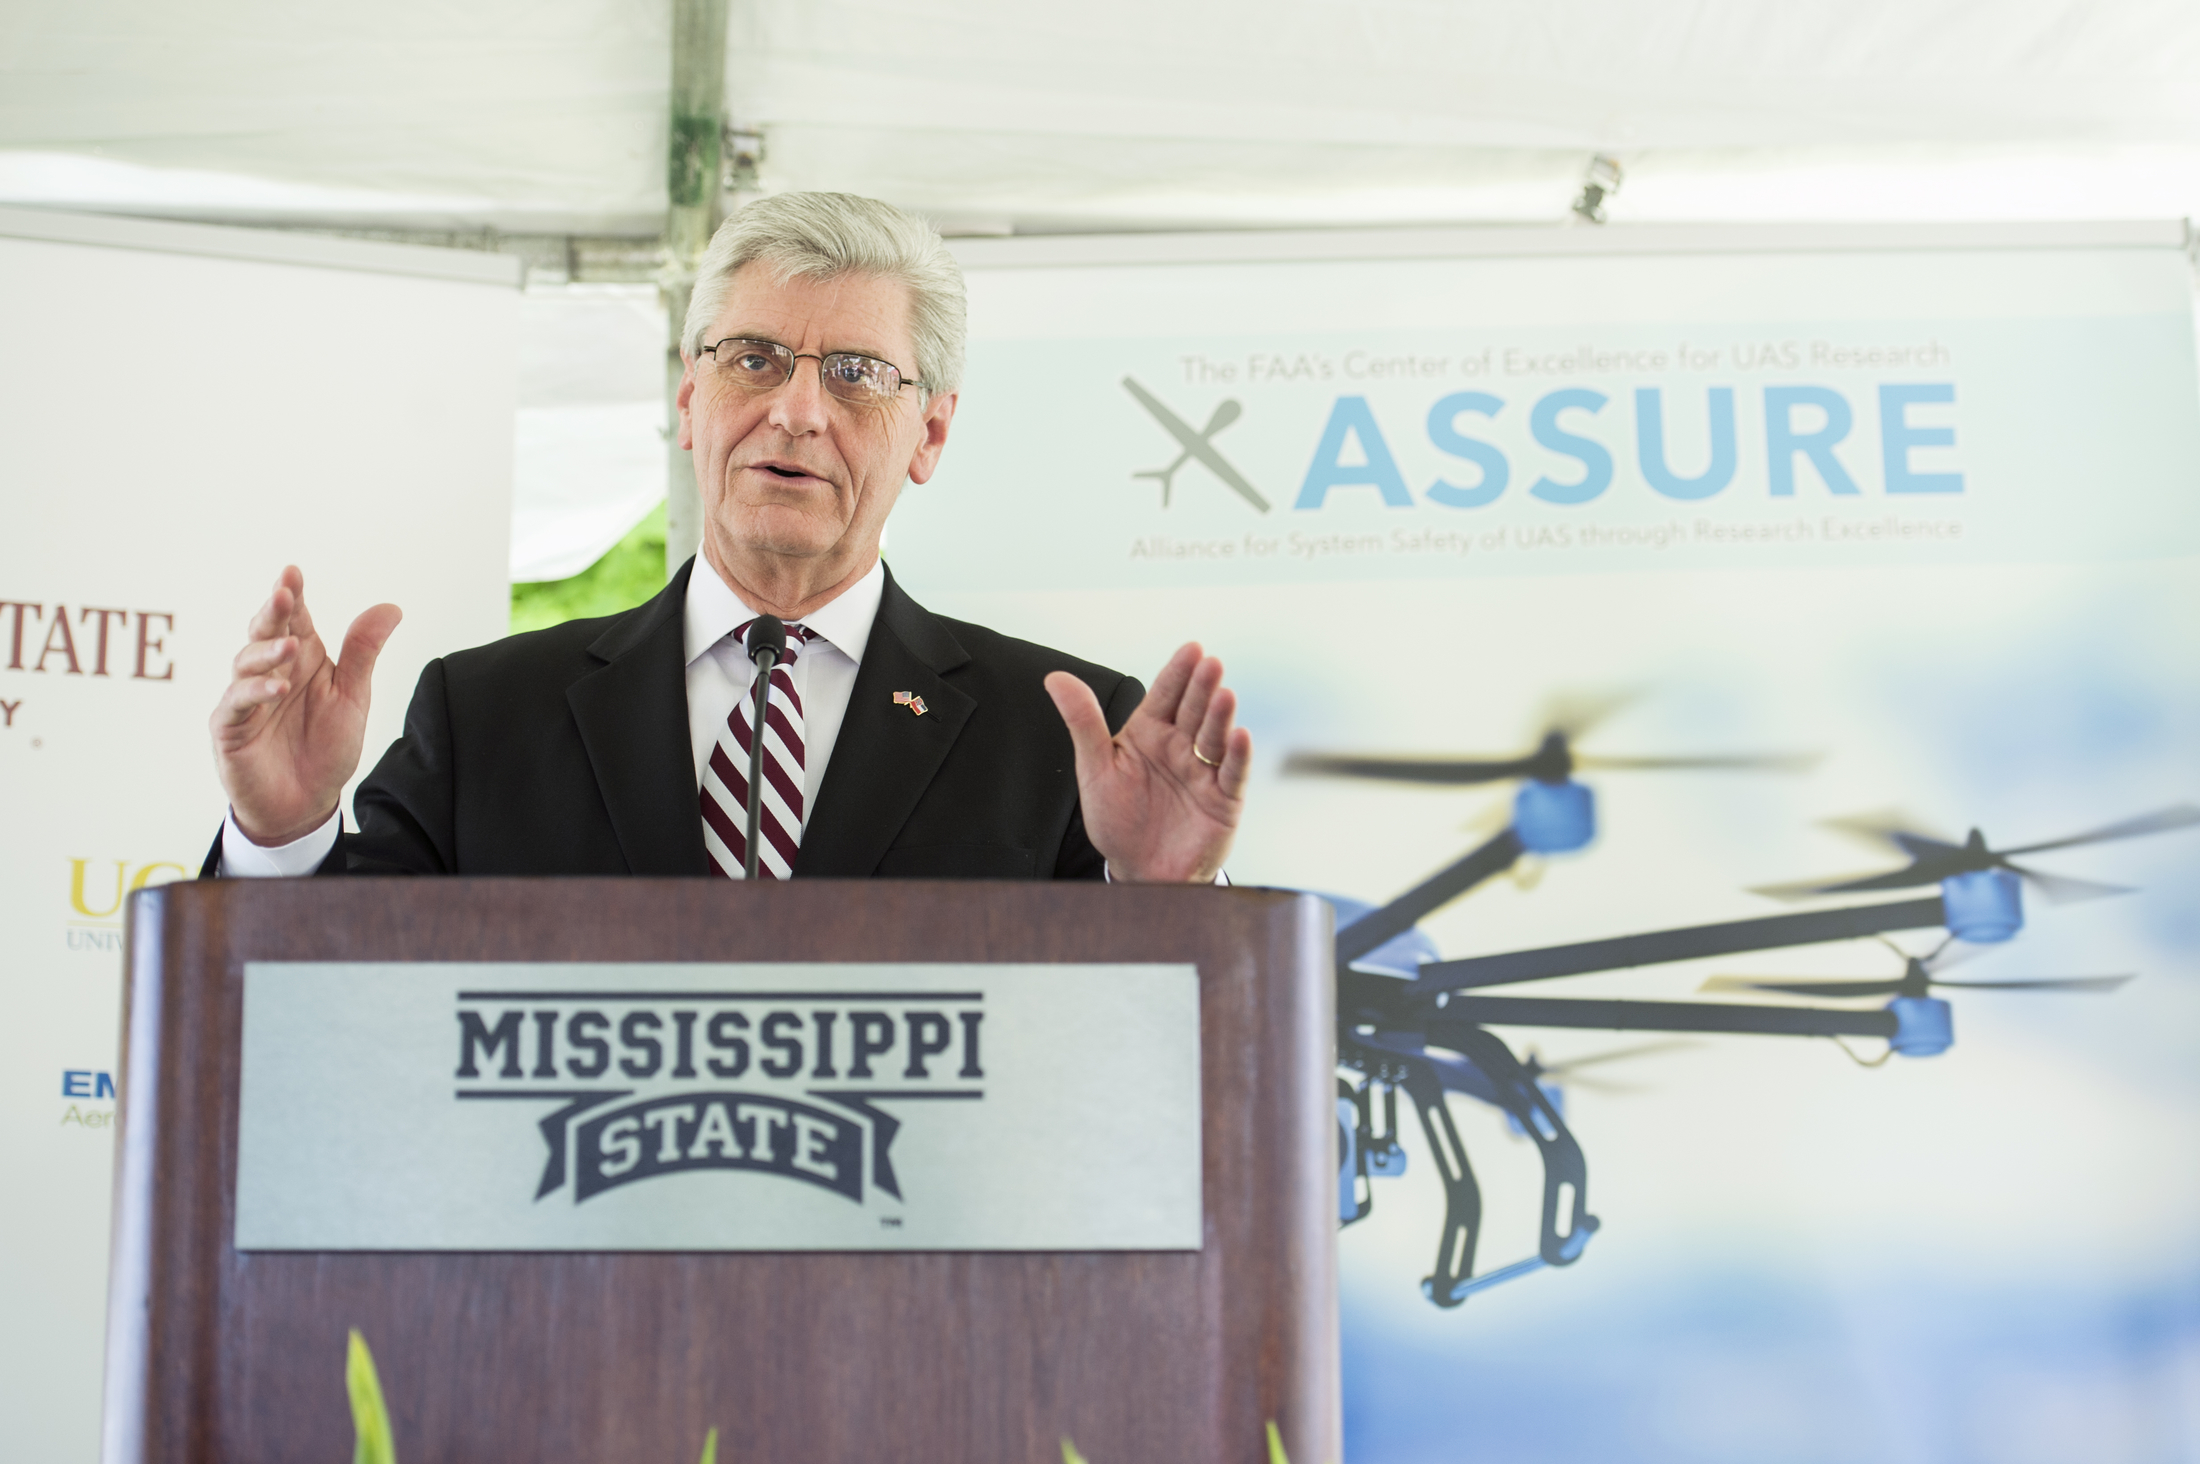 Gov. Phil Bryant speaks at Mississippi State University Friday [June 5] during a campus press conference about the Federal Aviation Administration designating the university as the National Center of Excellence for Unmanned Aircraft Systems. Bryant lauded MSU's leadership and the positive impact that ongoing research and development will have on the state's economy. Bryant said research at MSU has led the world in aerospace, automobile manufacturing and agribusiness.